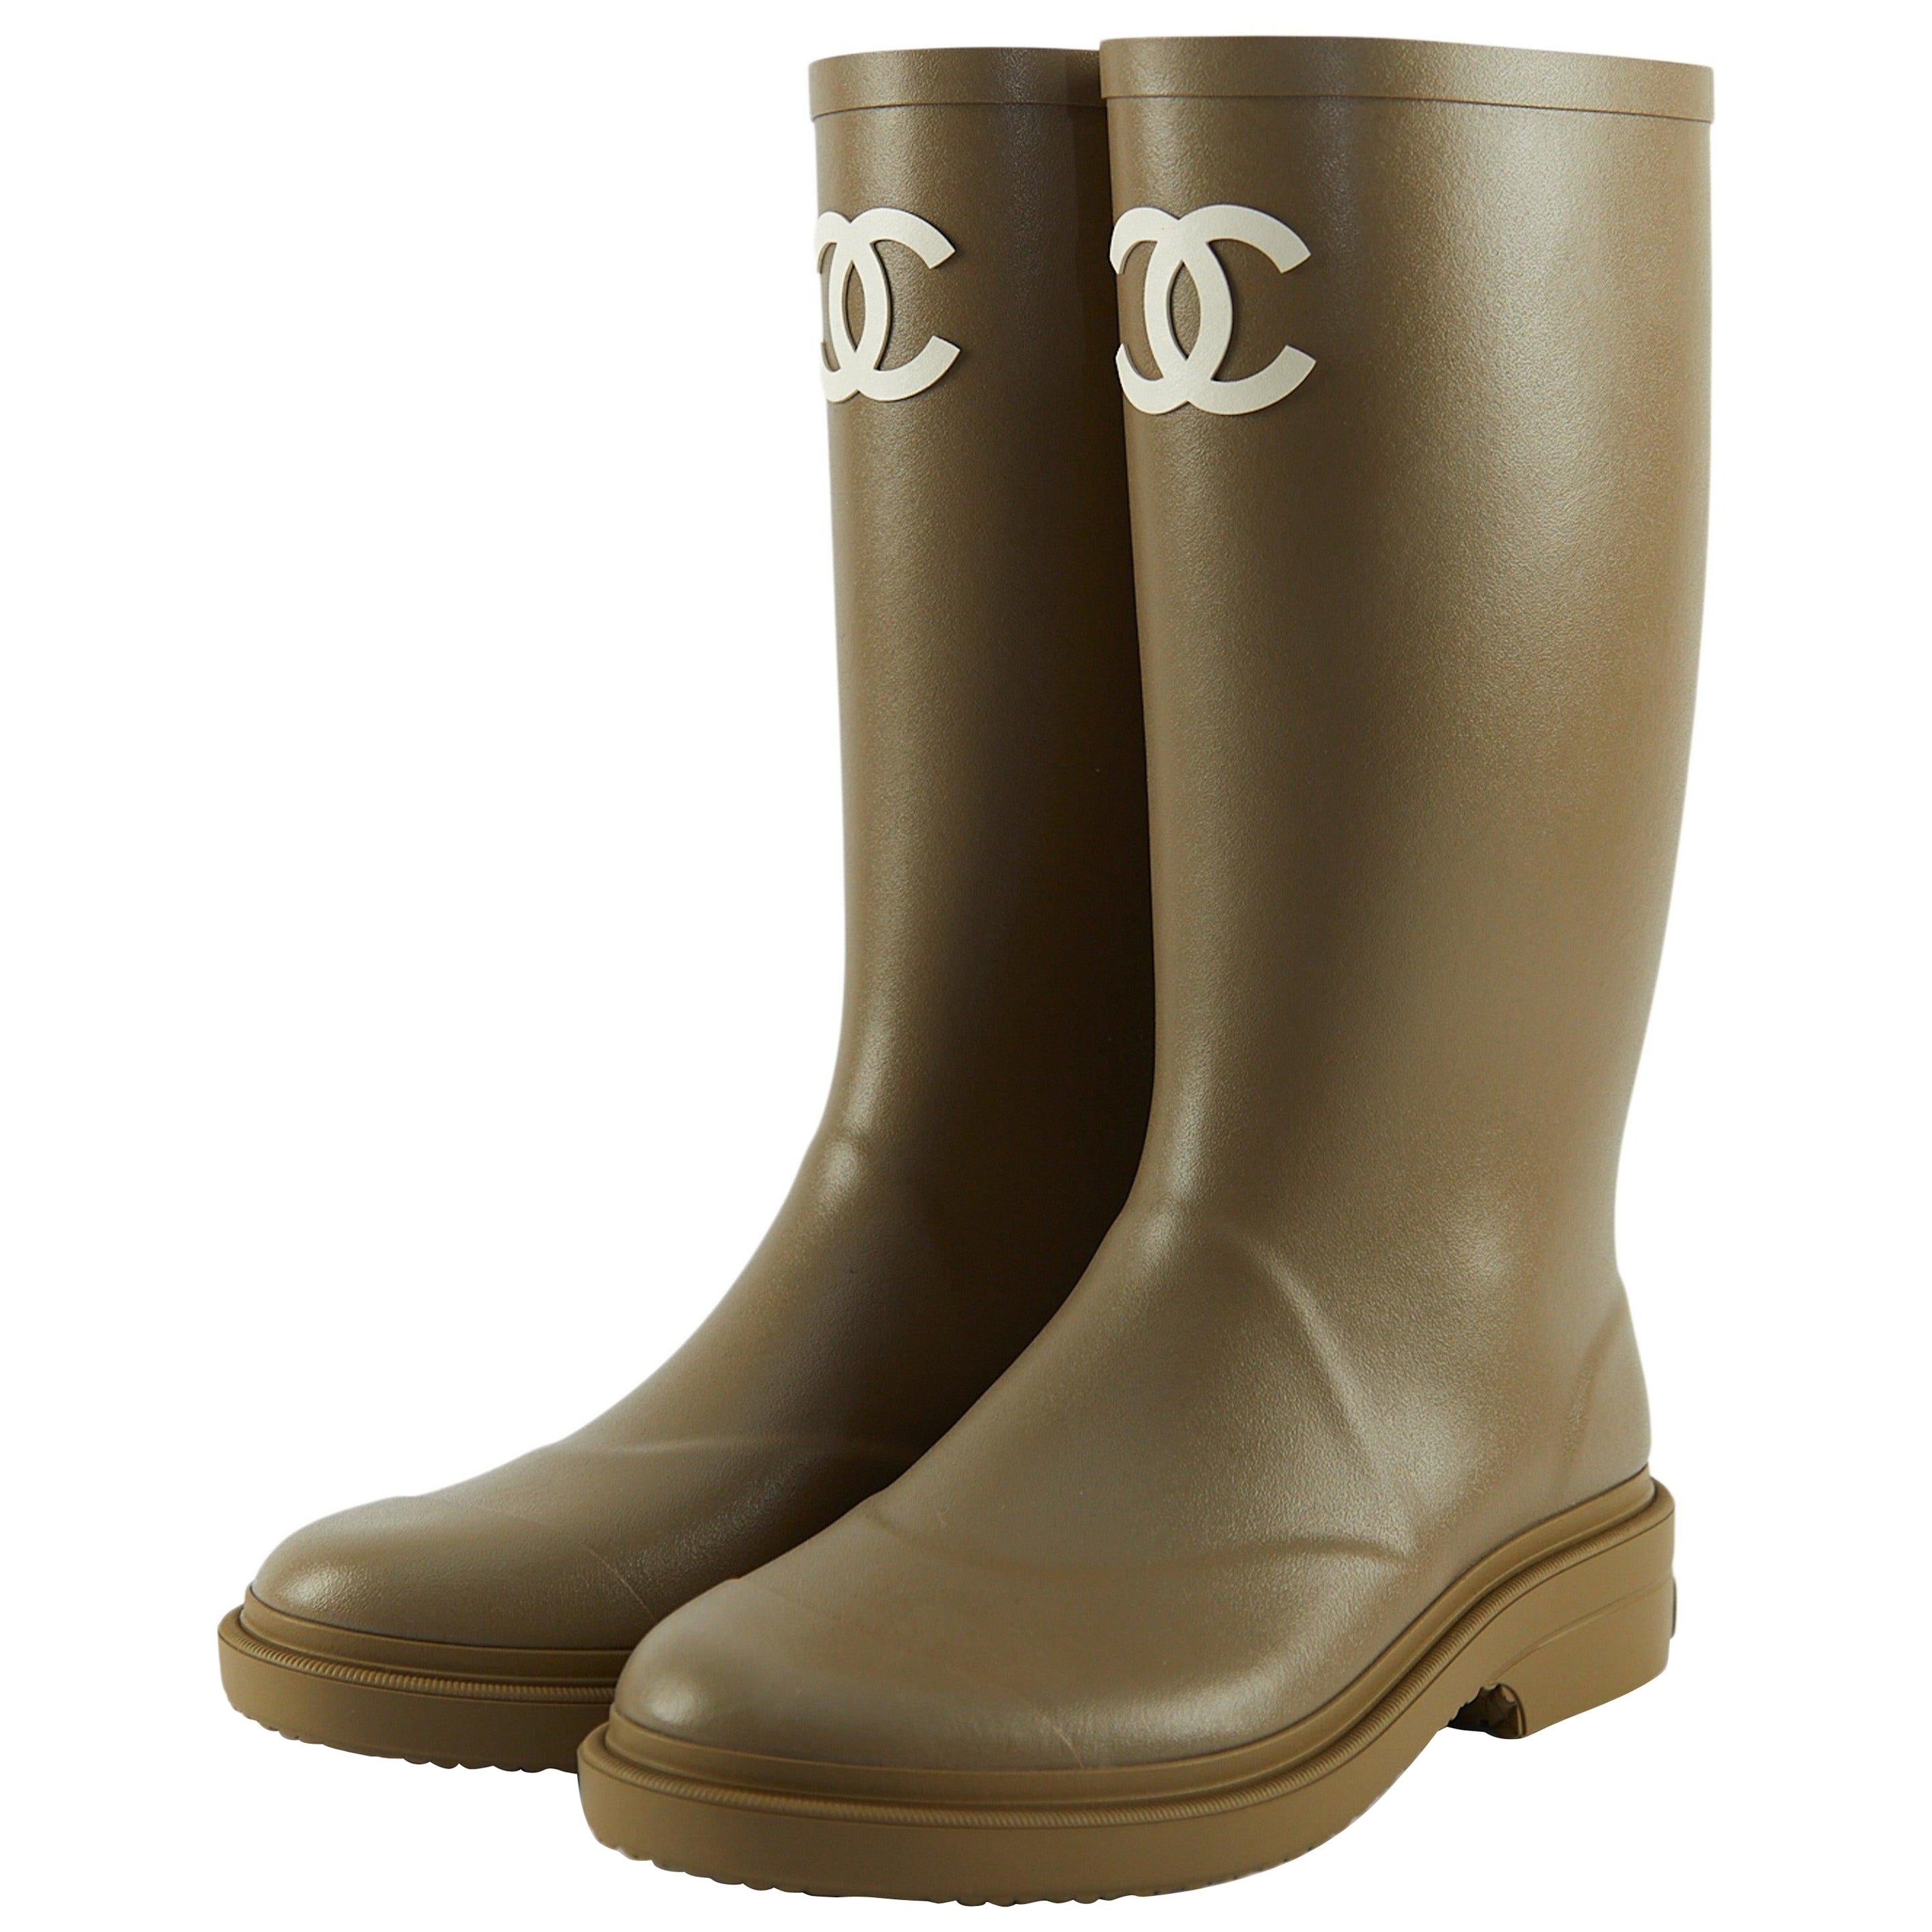 CHANEL WELLIES Khaki - Size 39 For Sale